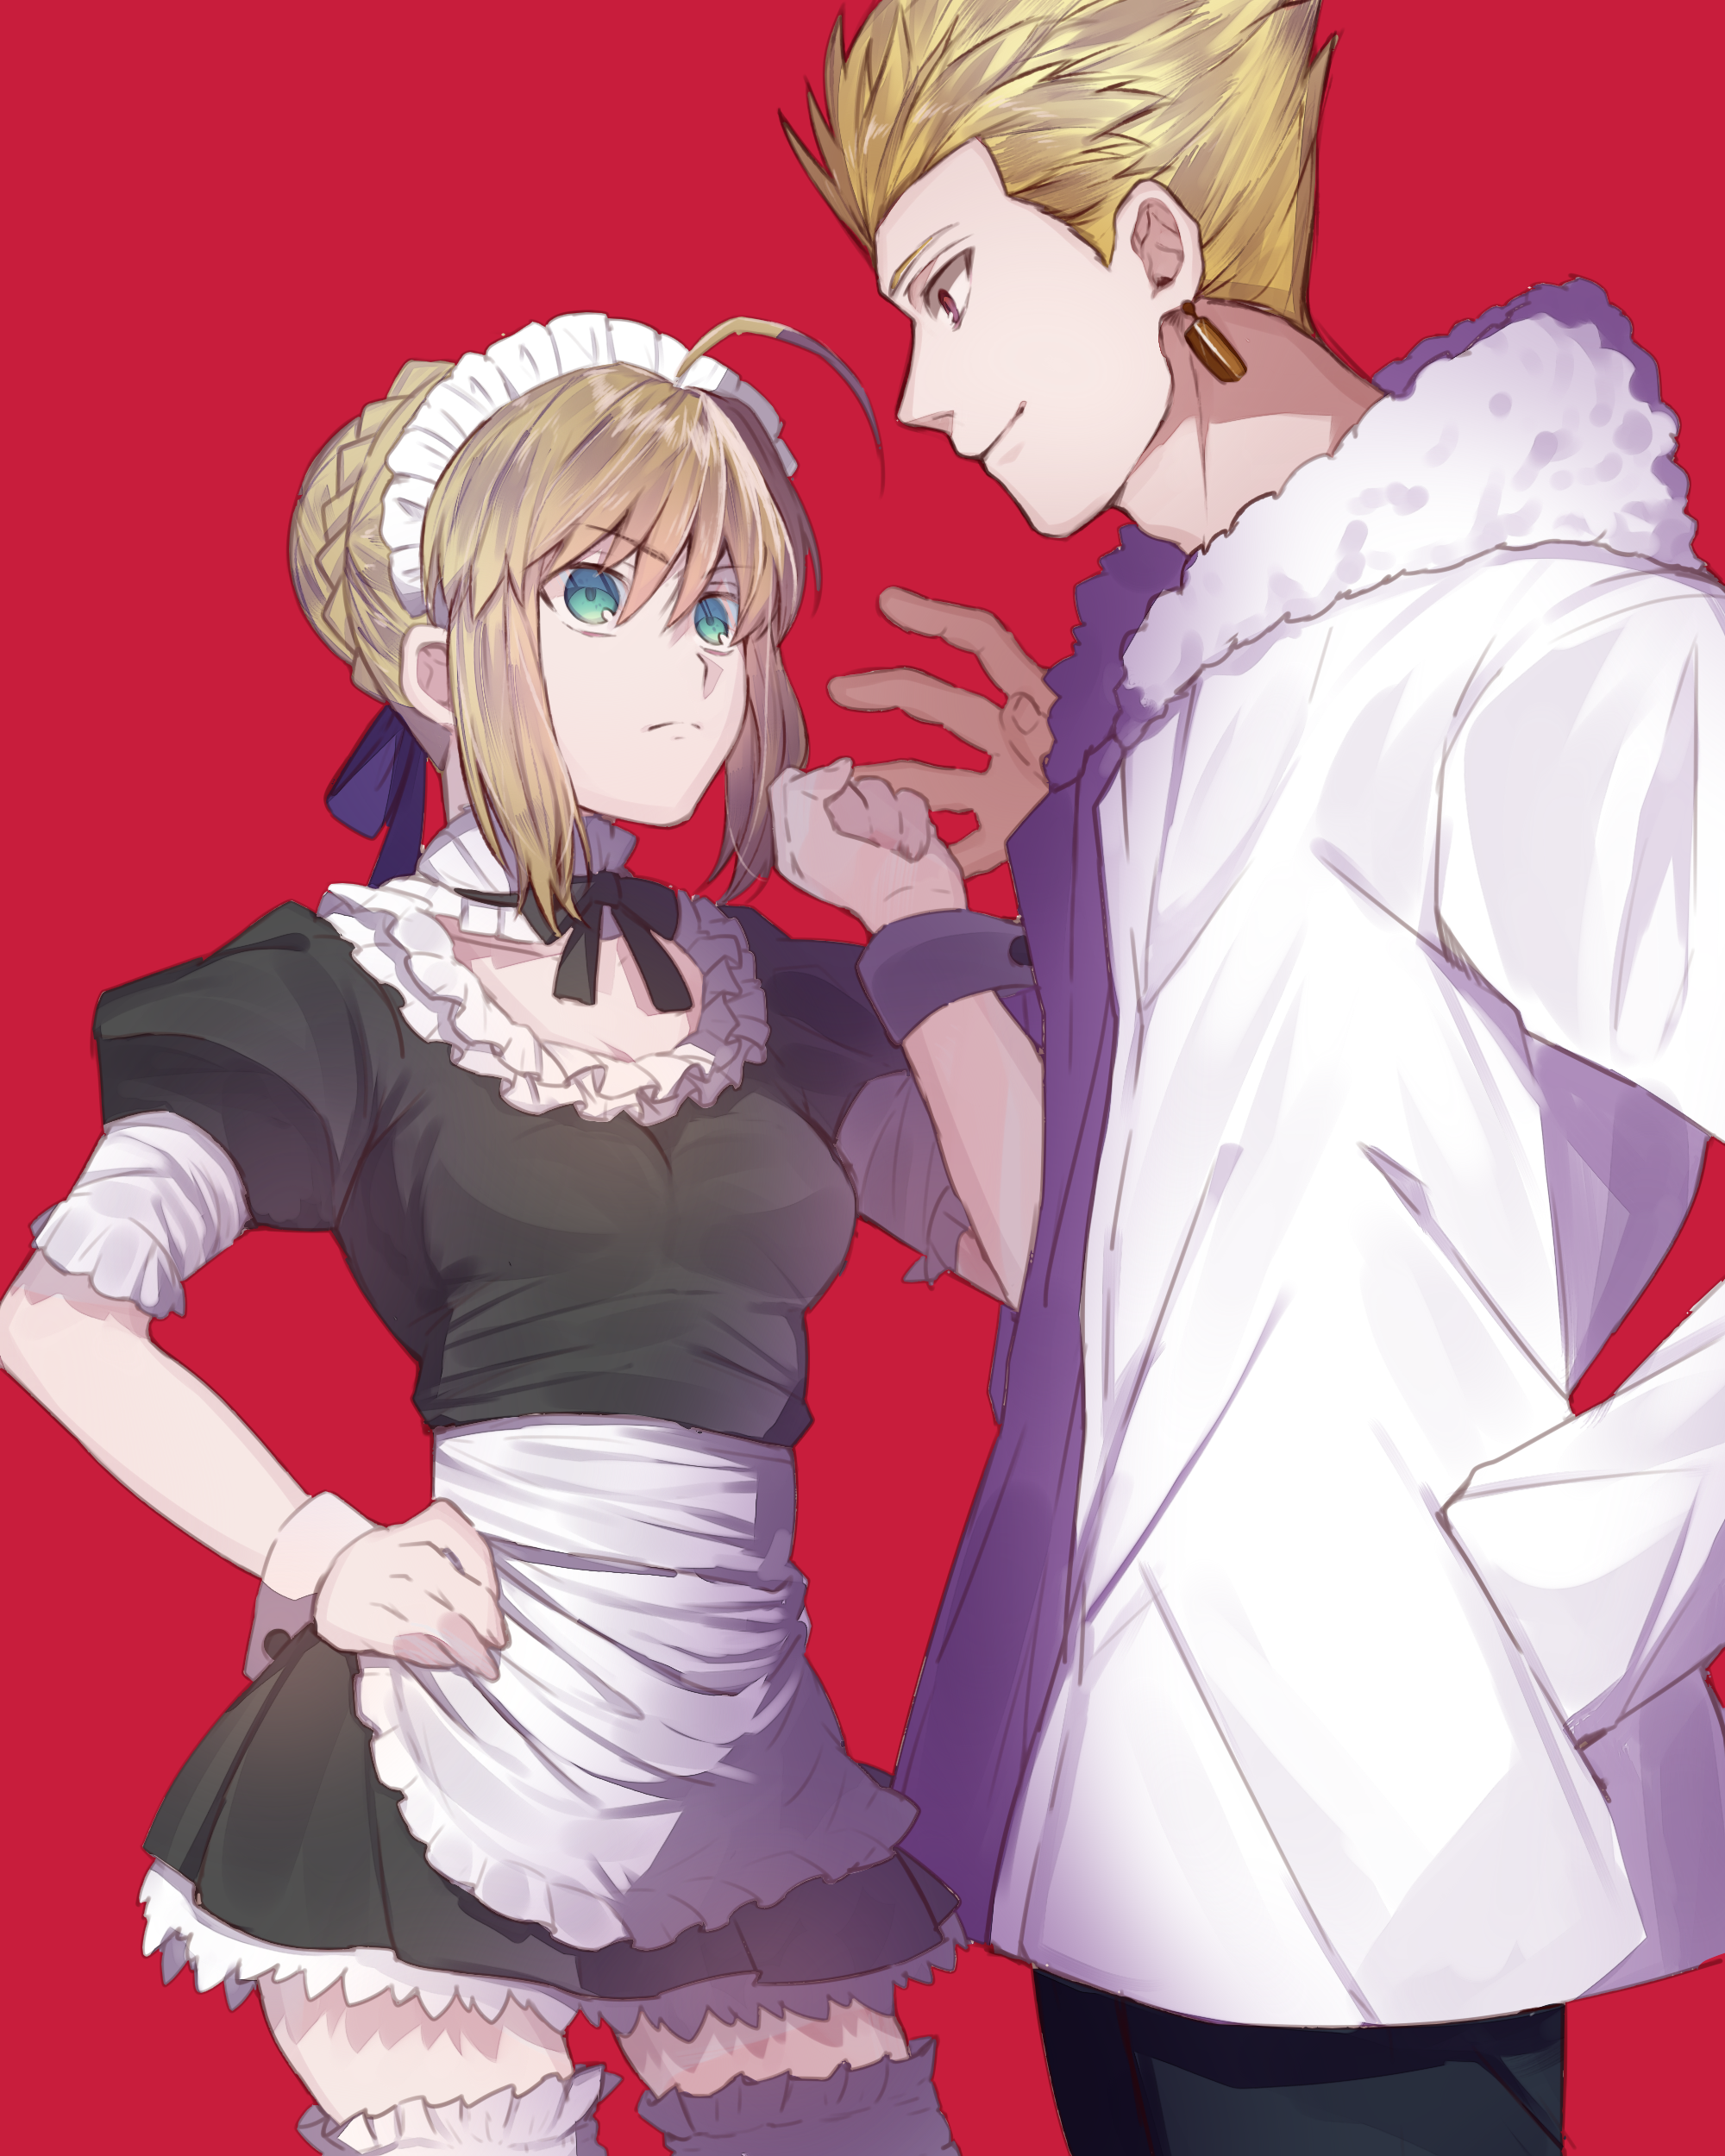 Anime 2000x2500 Fate series Fate/Stay Night small boobs maid outfit white coat cleavage ahoge thighs anime girls looking away 2D Saber Gilgamesh portrait display curvy braids simple background smiling aqua eyes anime boys fan art anime blonde thigh-highs Artoria Pendragon